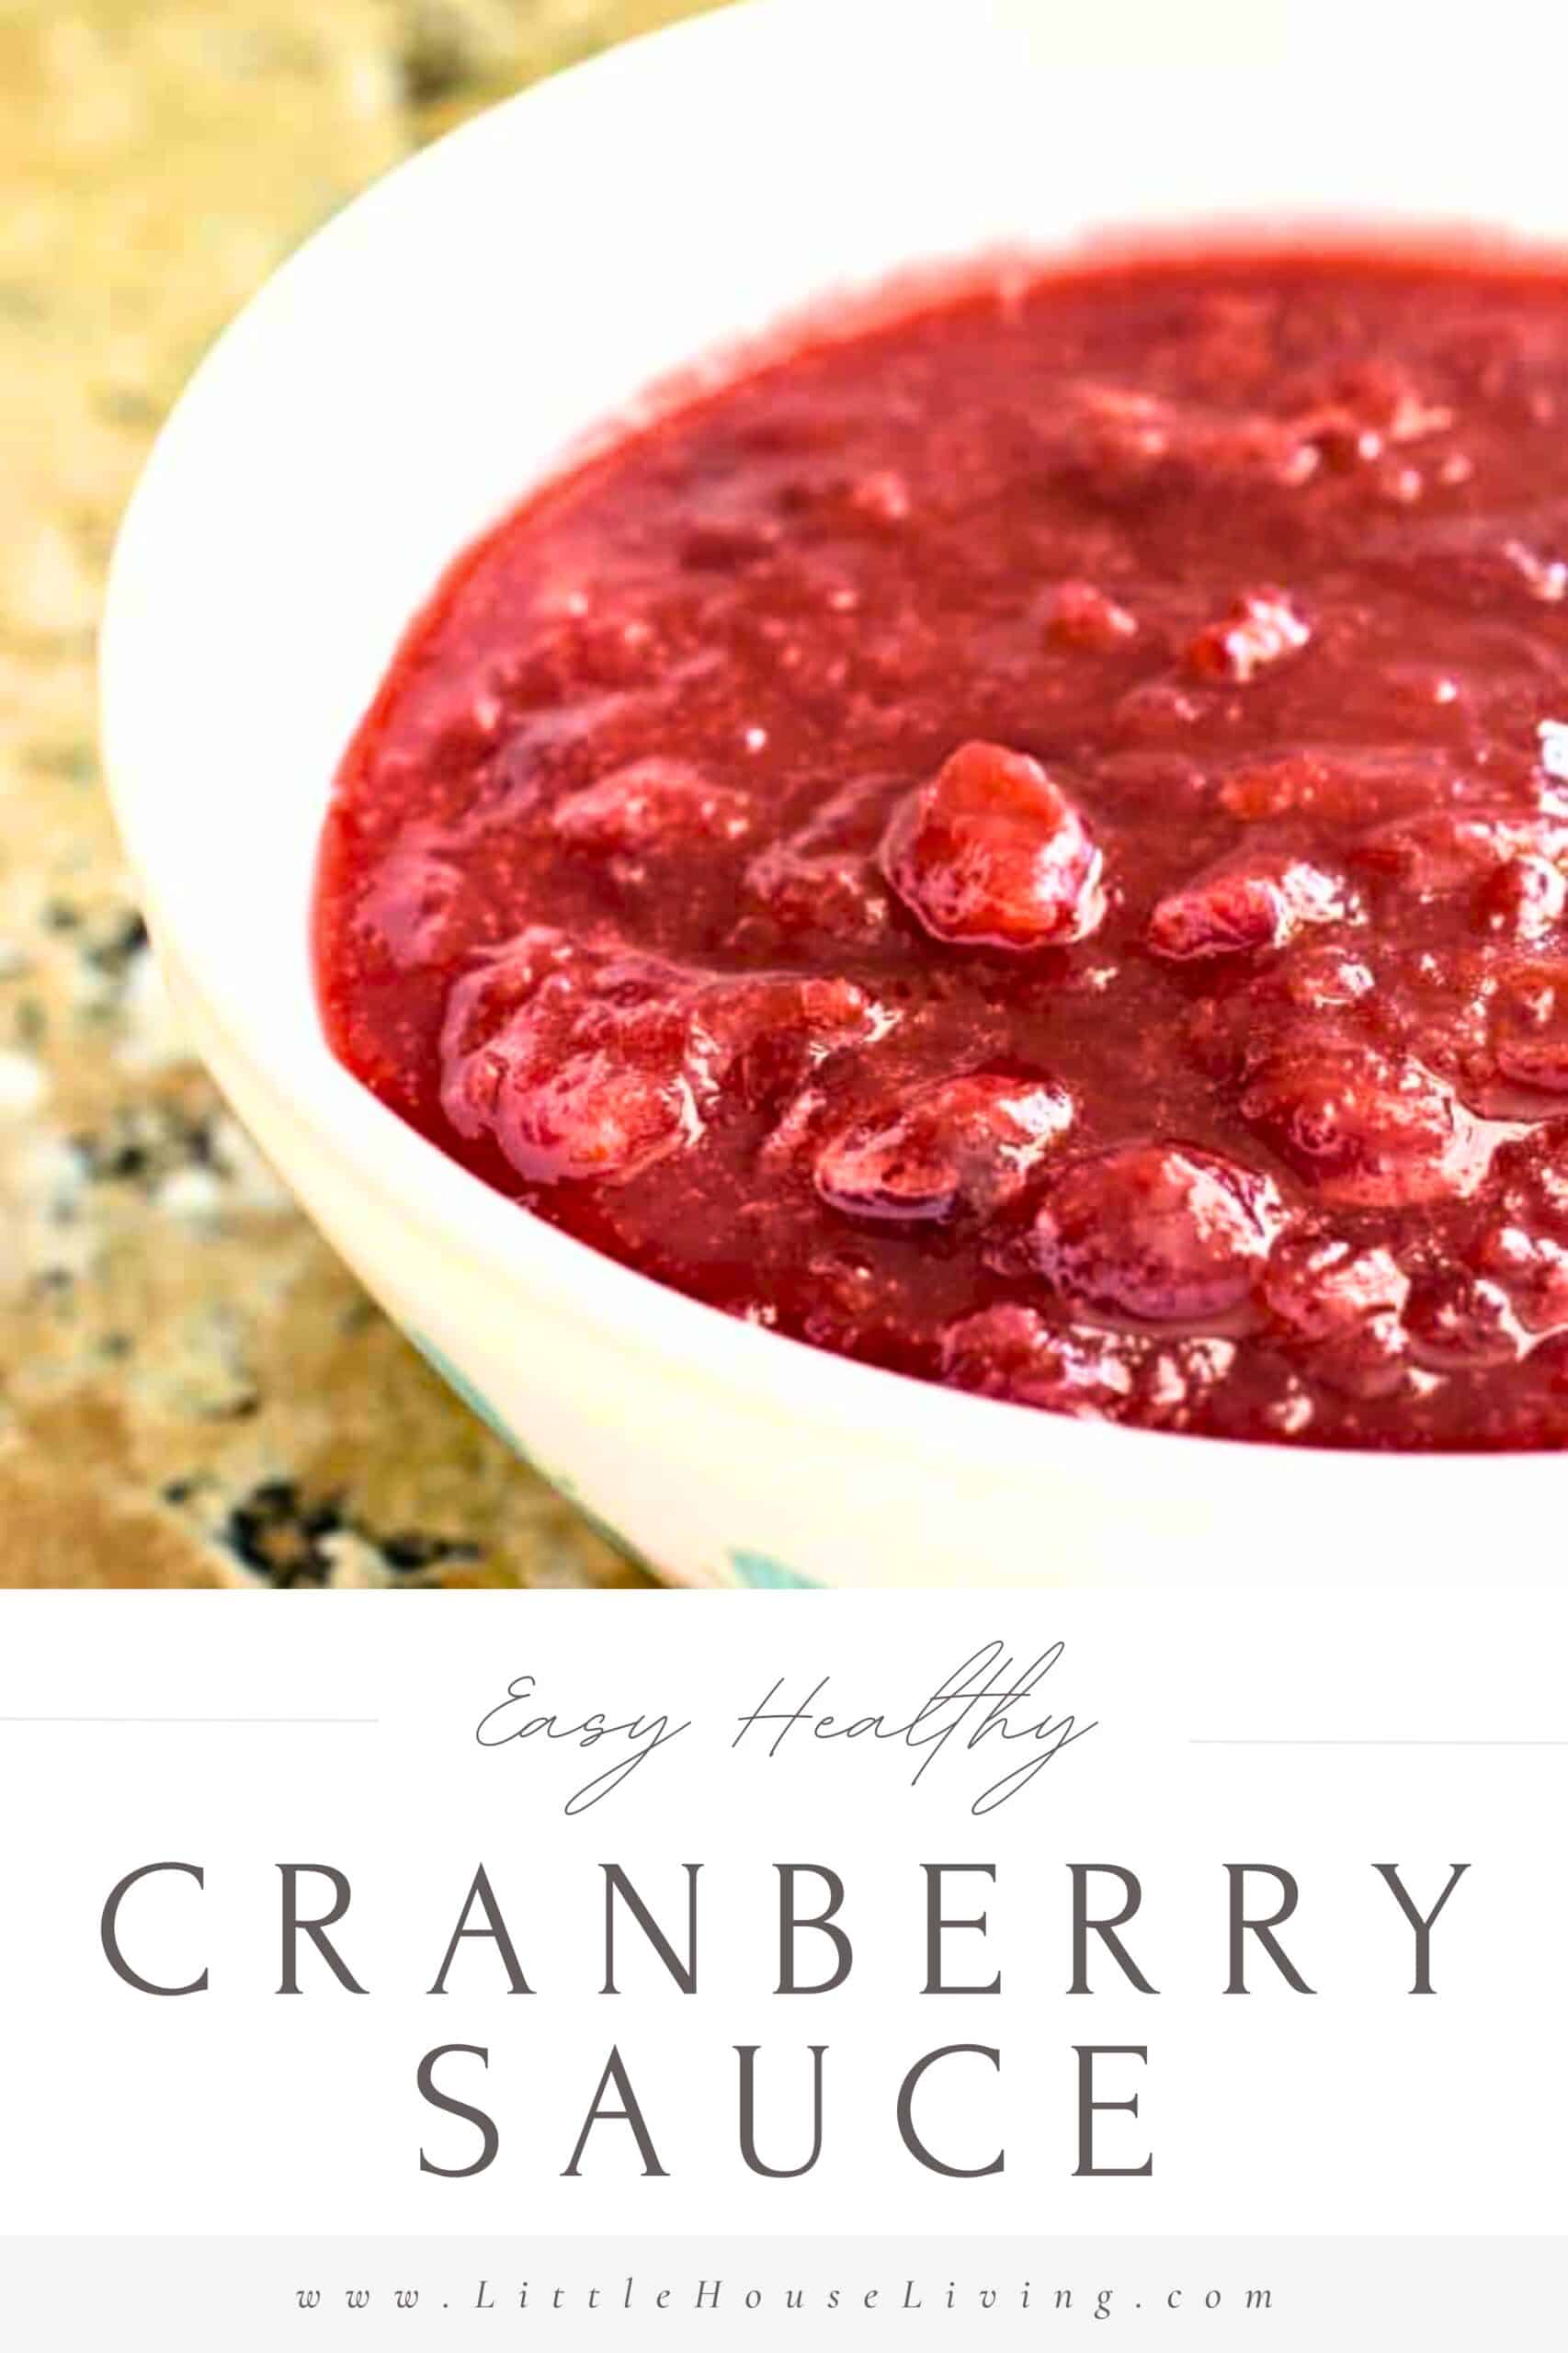 Looking for a simple and yet somewhat healthy Cranberry Sauce that you can make this holiday season? This is the recipe that we have been enjoying for several years. It only needs 3 simple ingredients to make one delicious sauce.